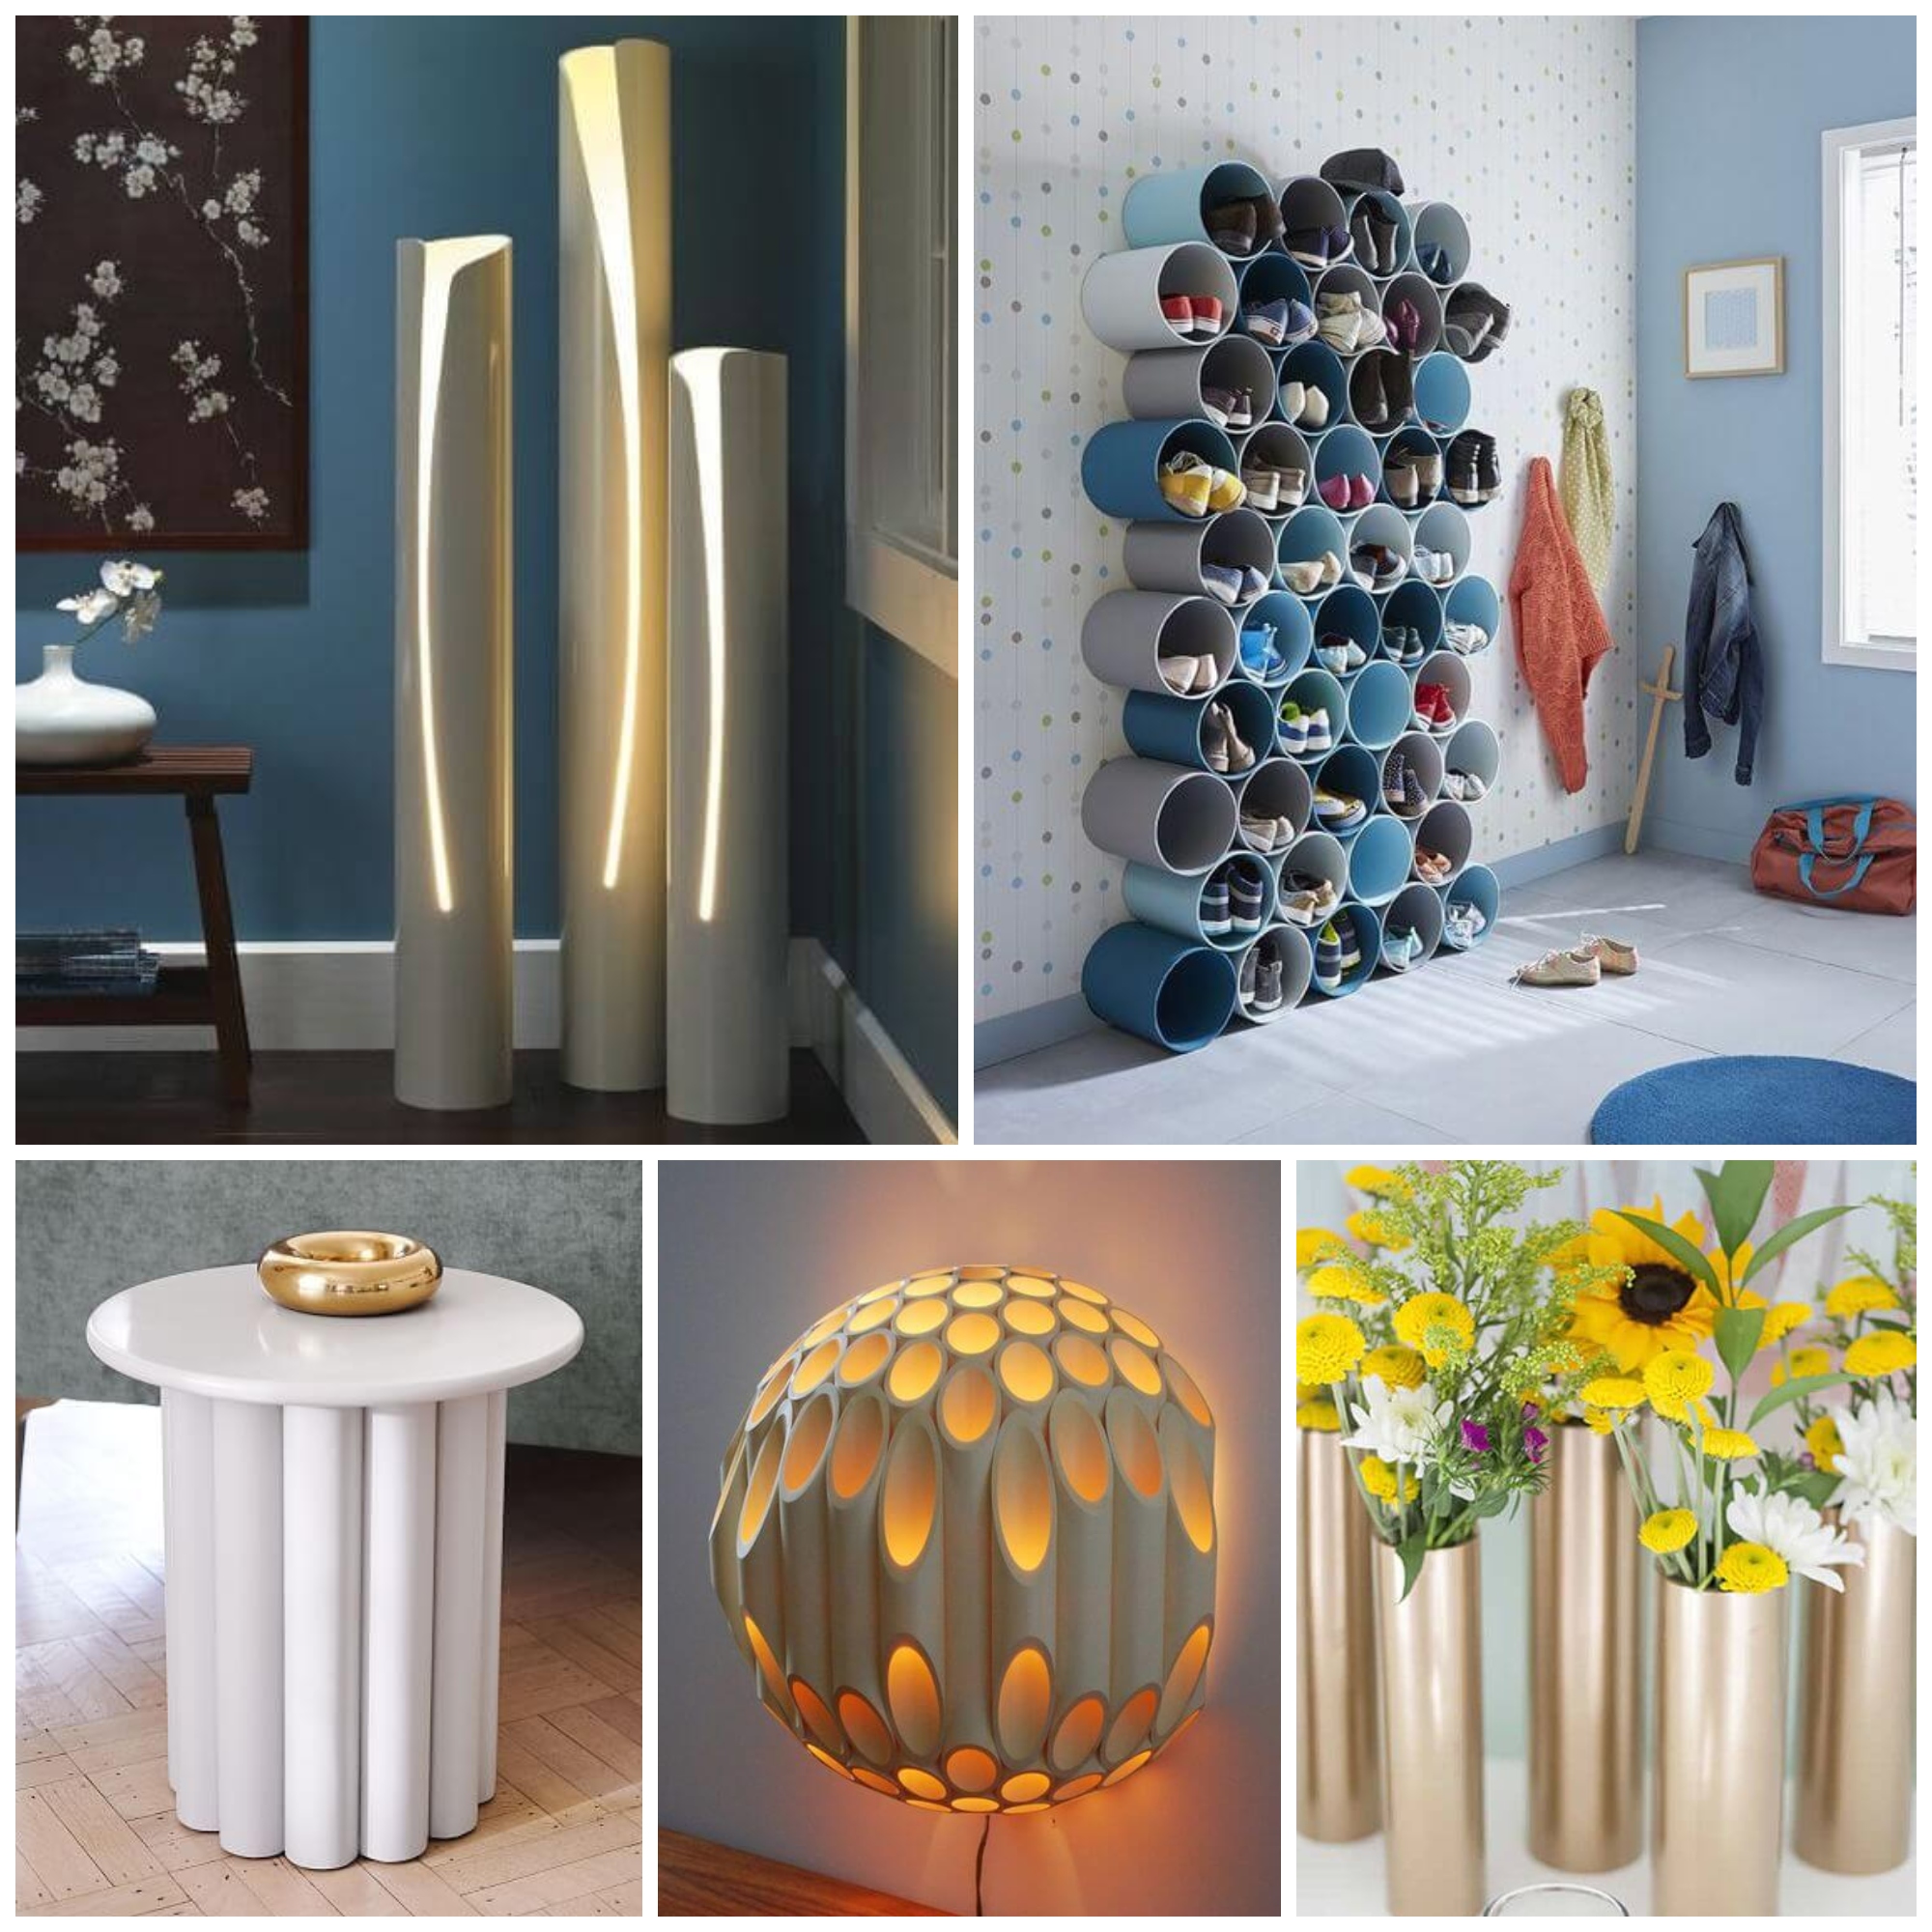 27 DIY PVC Projects To Decorate Home